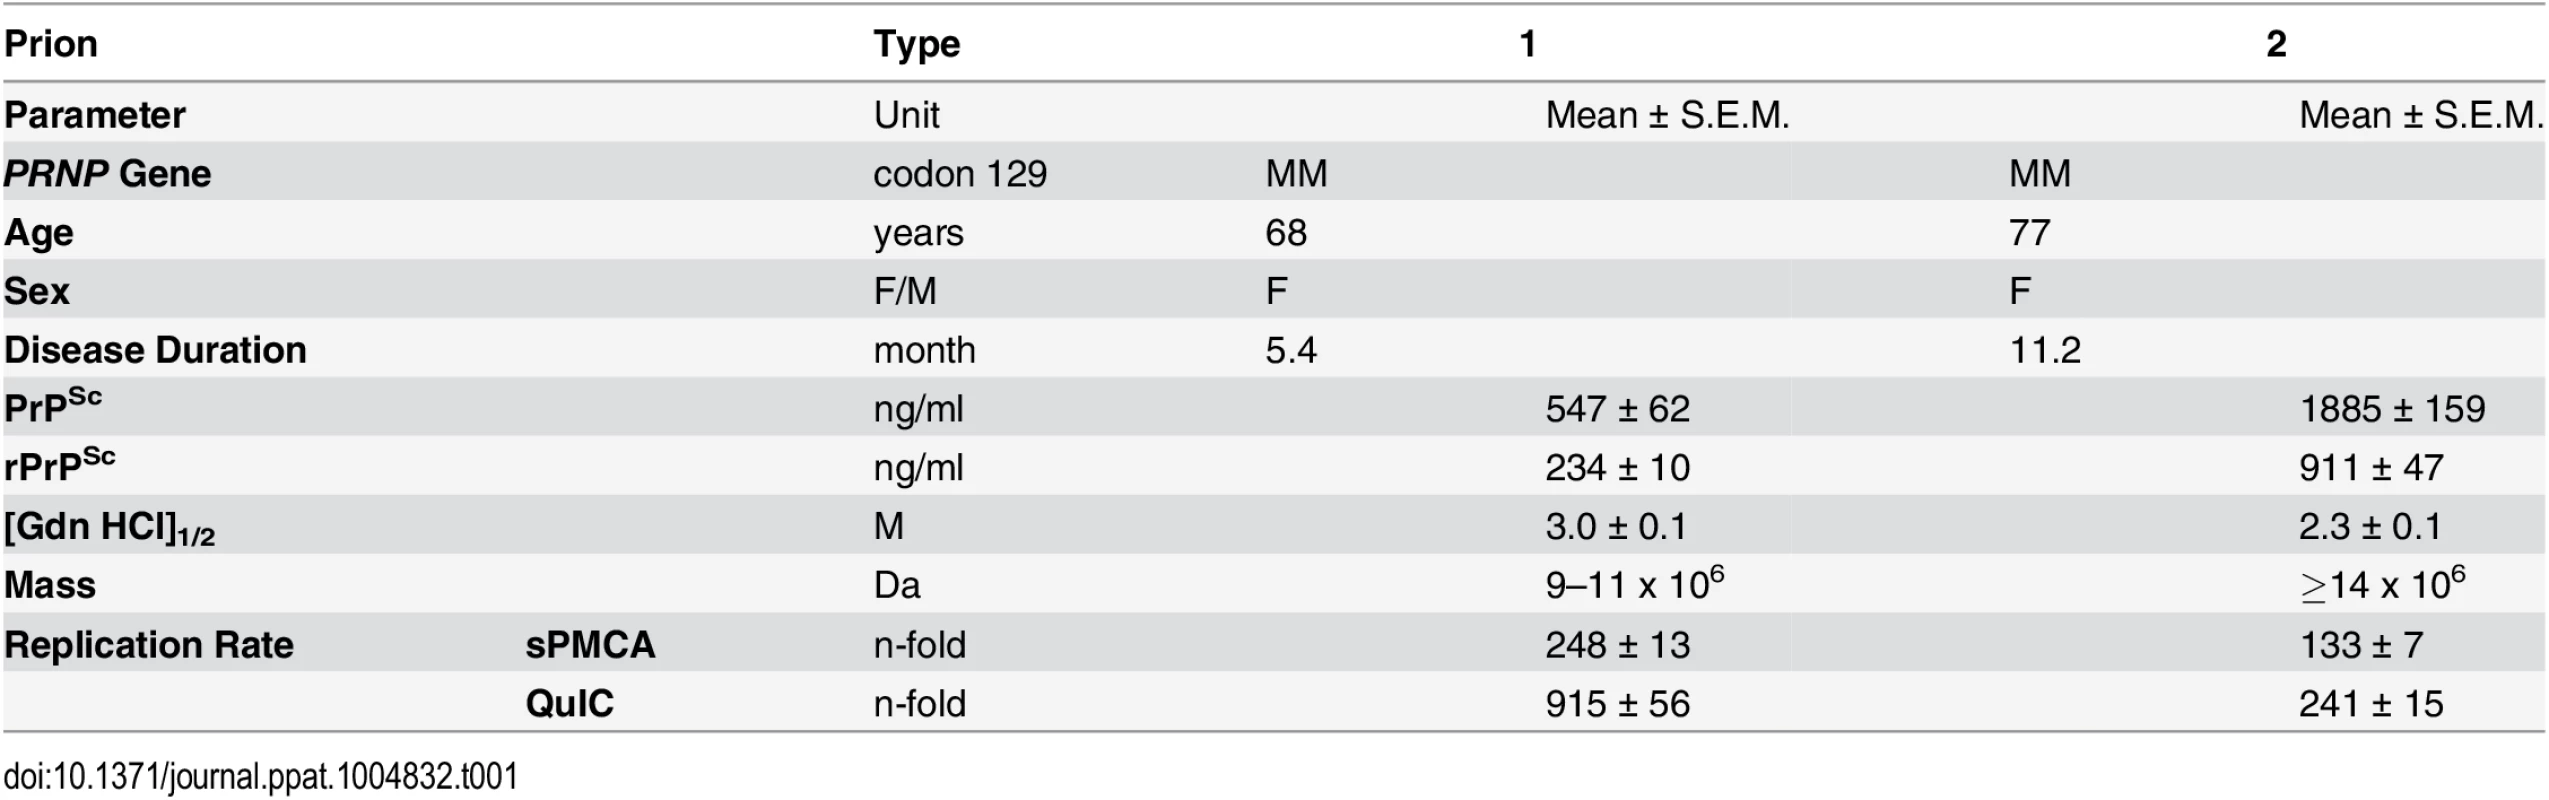 Source, biophysical characteristics, and replication rate of Type 1 and Type 2 sCJD prions.